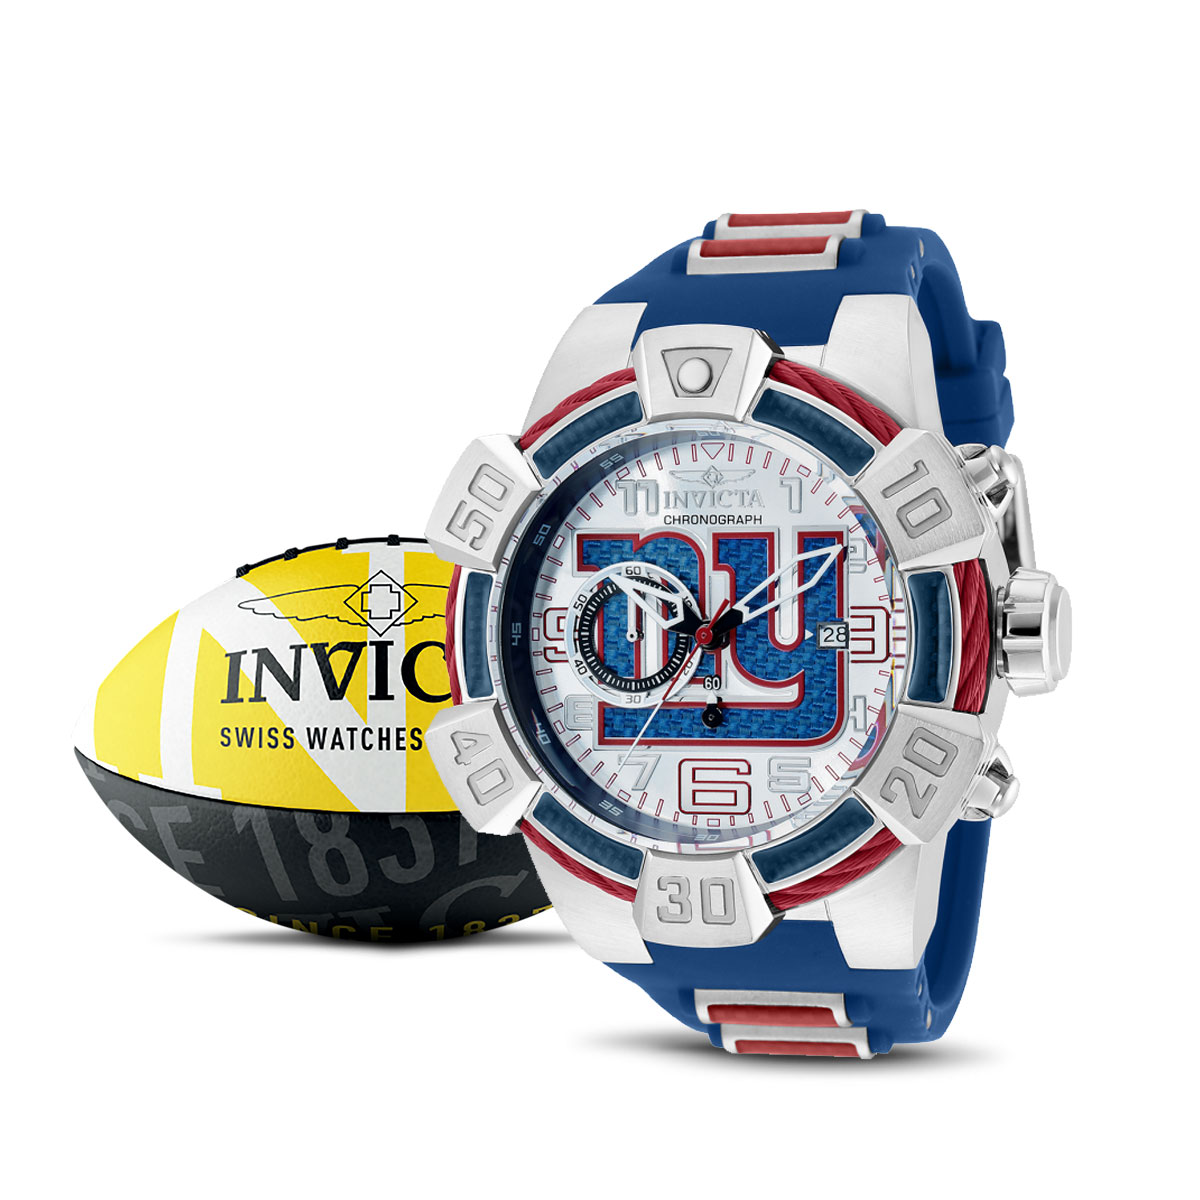 Invicta NFL New York Giants Men's Watch - 52mm, Blue, Red (35788)